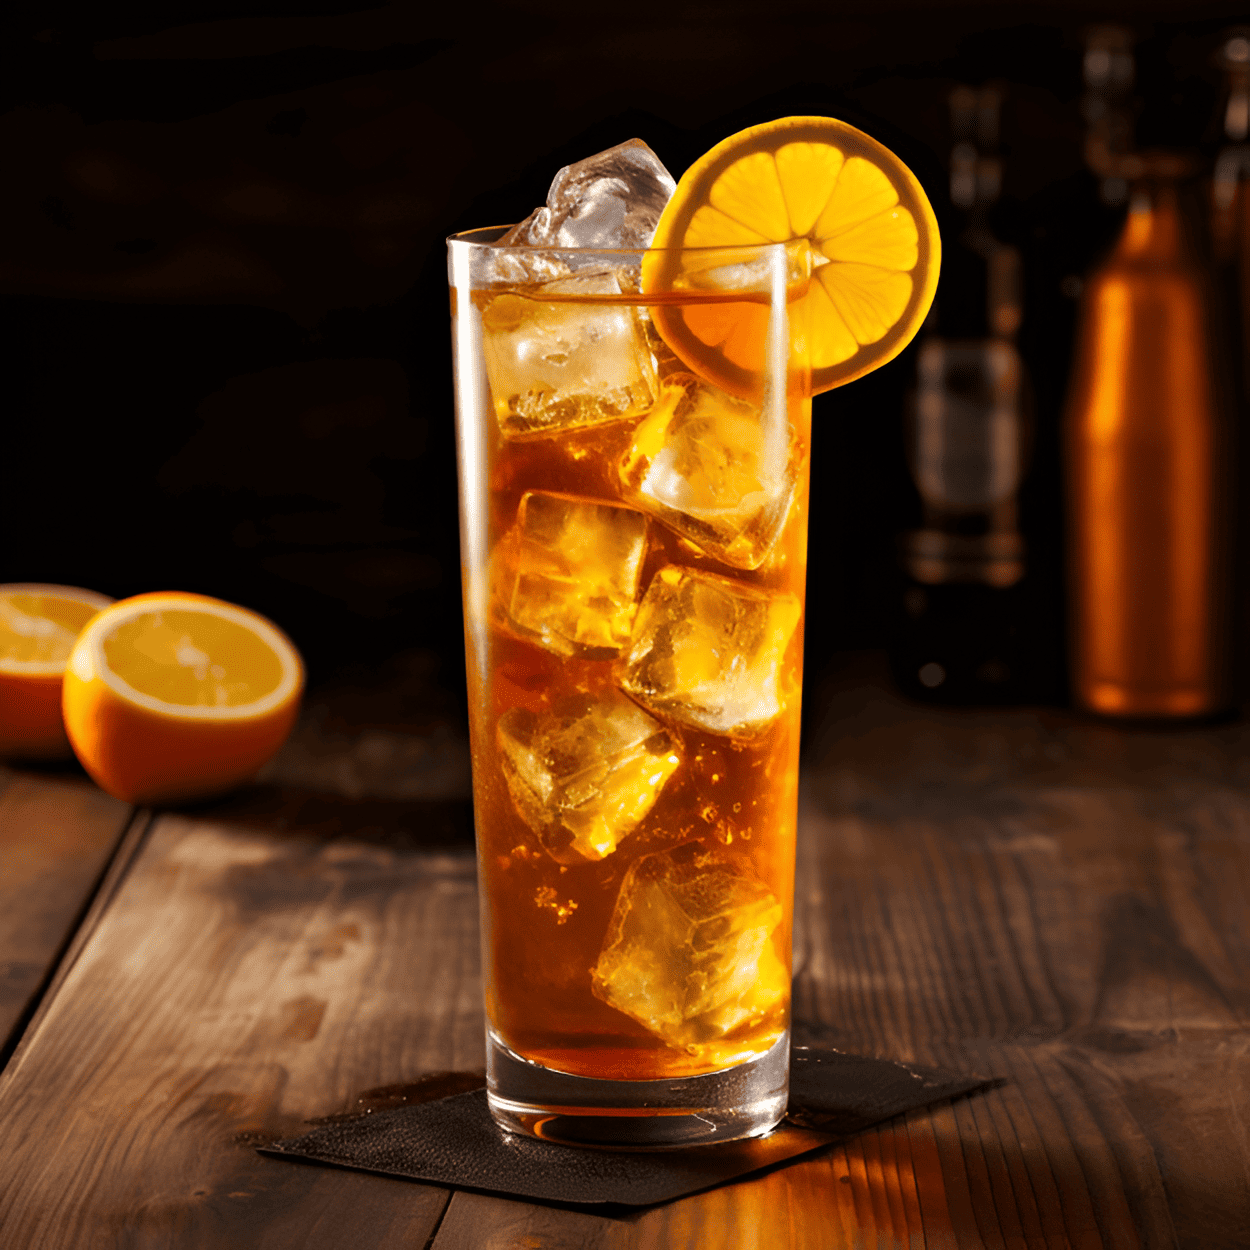 Brass Monkey Cocktail Recipe - The Brass Monkey is a sweet, fruity cocktail with a hint of tartness. It's a refreshing drink with a strong citrus flavor, balanced by the sweetness of the rum and the slight bitterness of the beer.